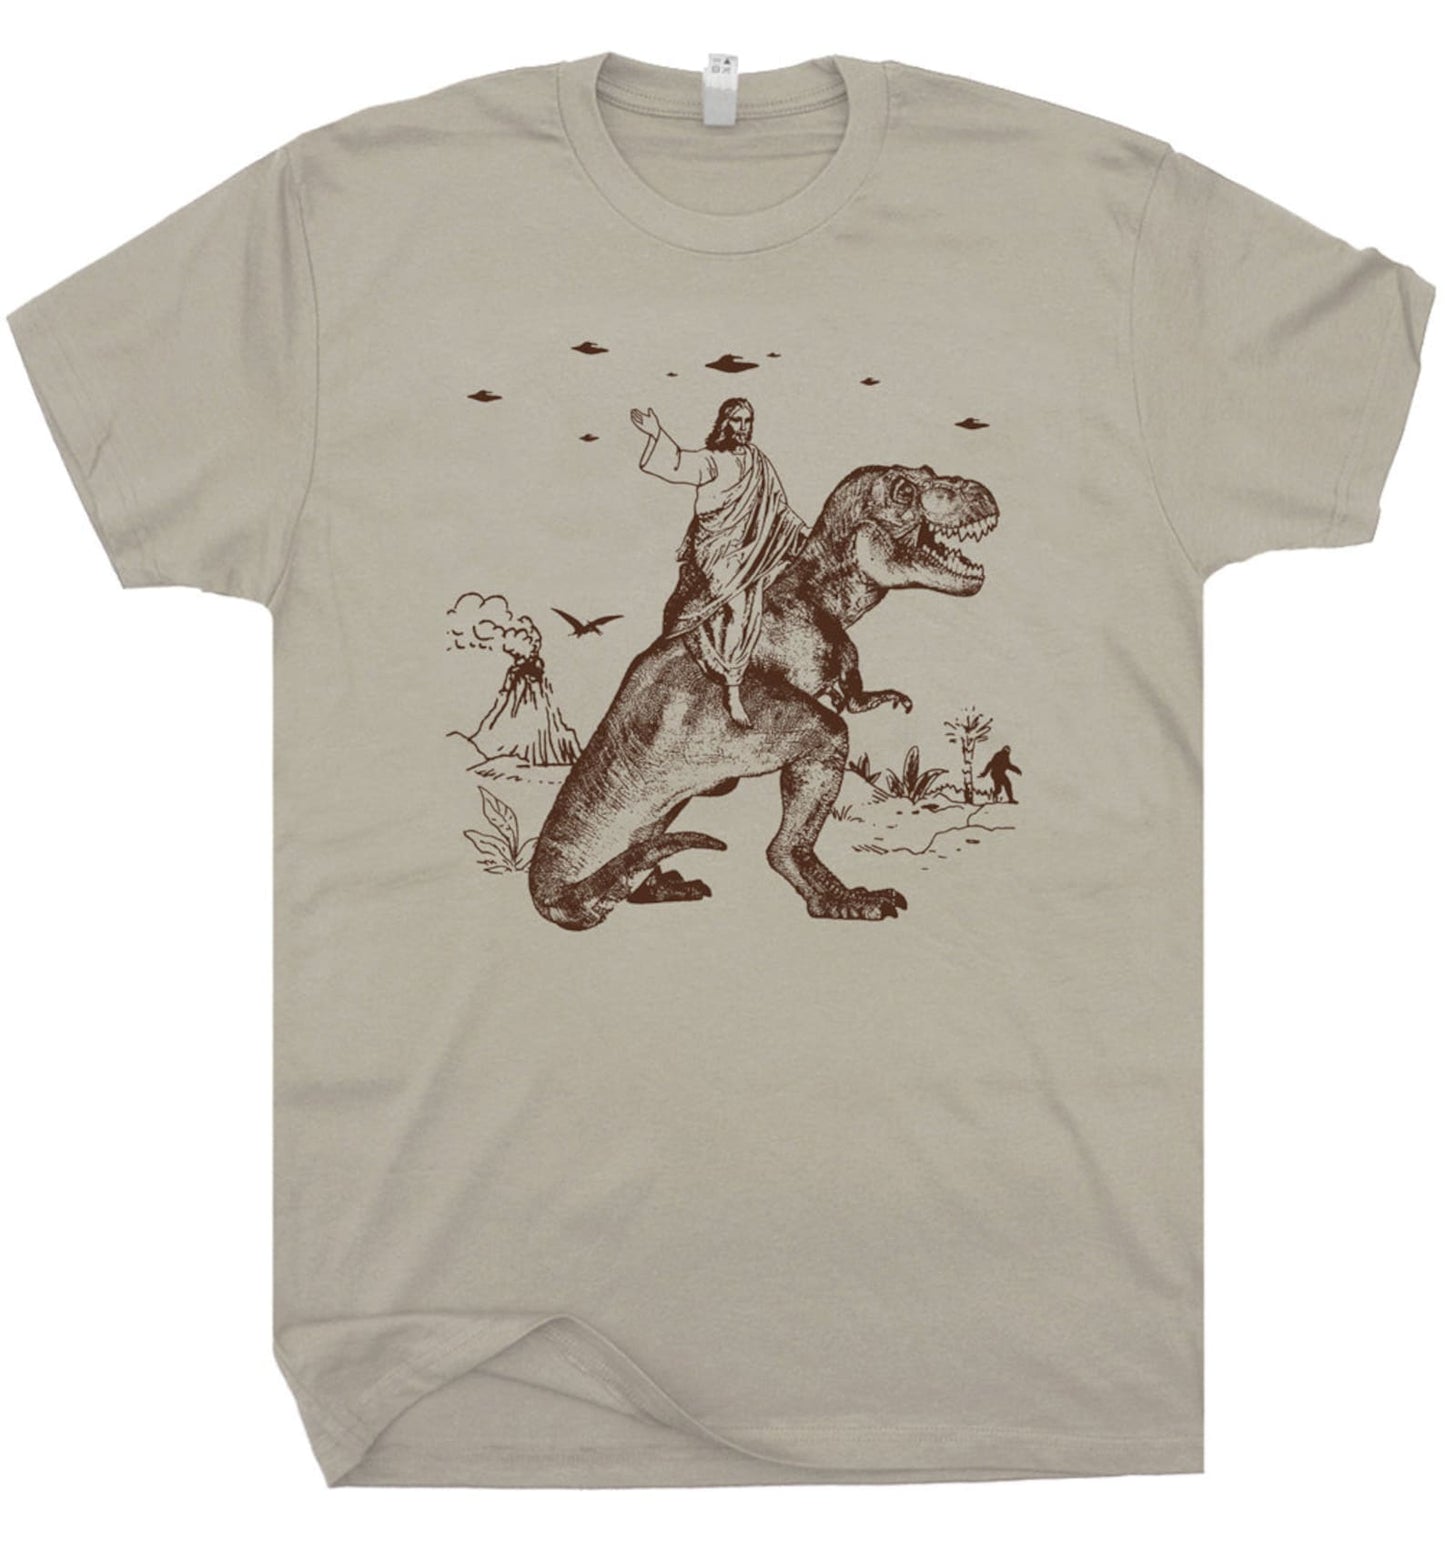 Jesus Riding Dinosaur T Shirt UFO Funny Jesus T Shirts Offensive Cool Graphic Shirts - Msix Apparel - Sand Color T Shirt